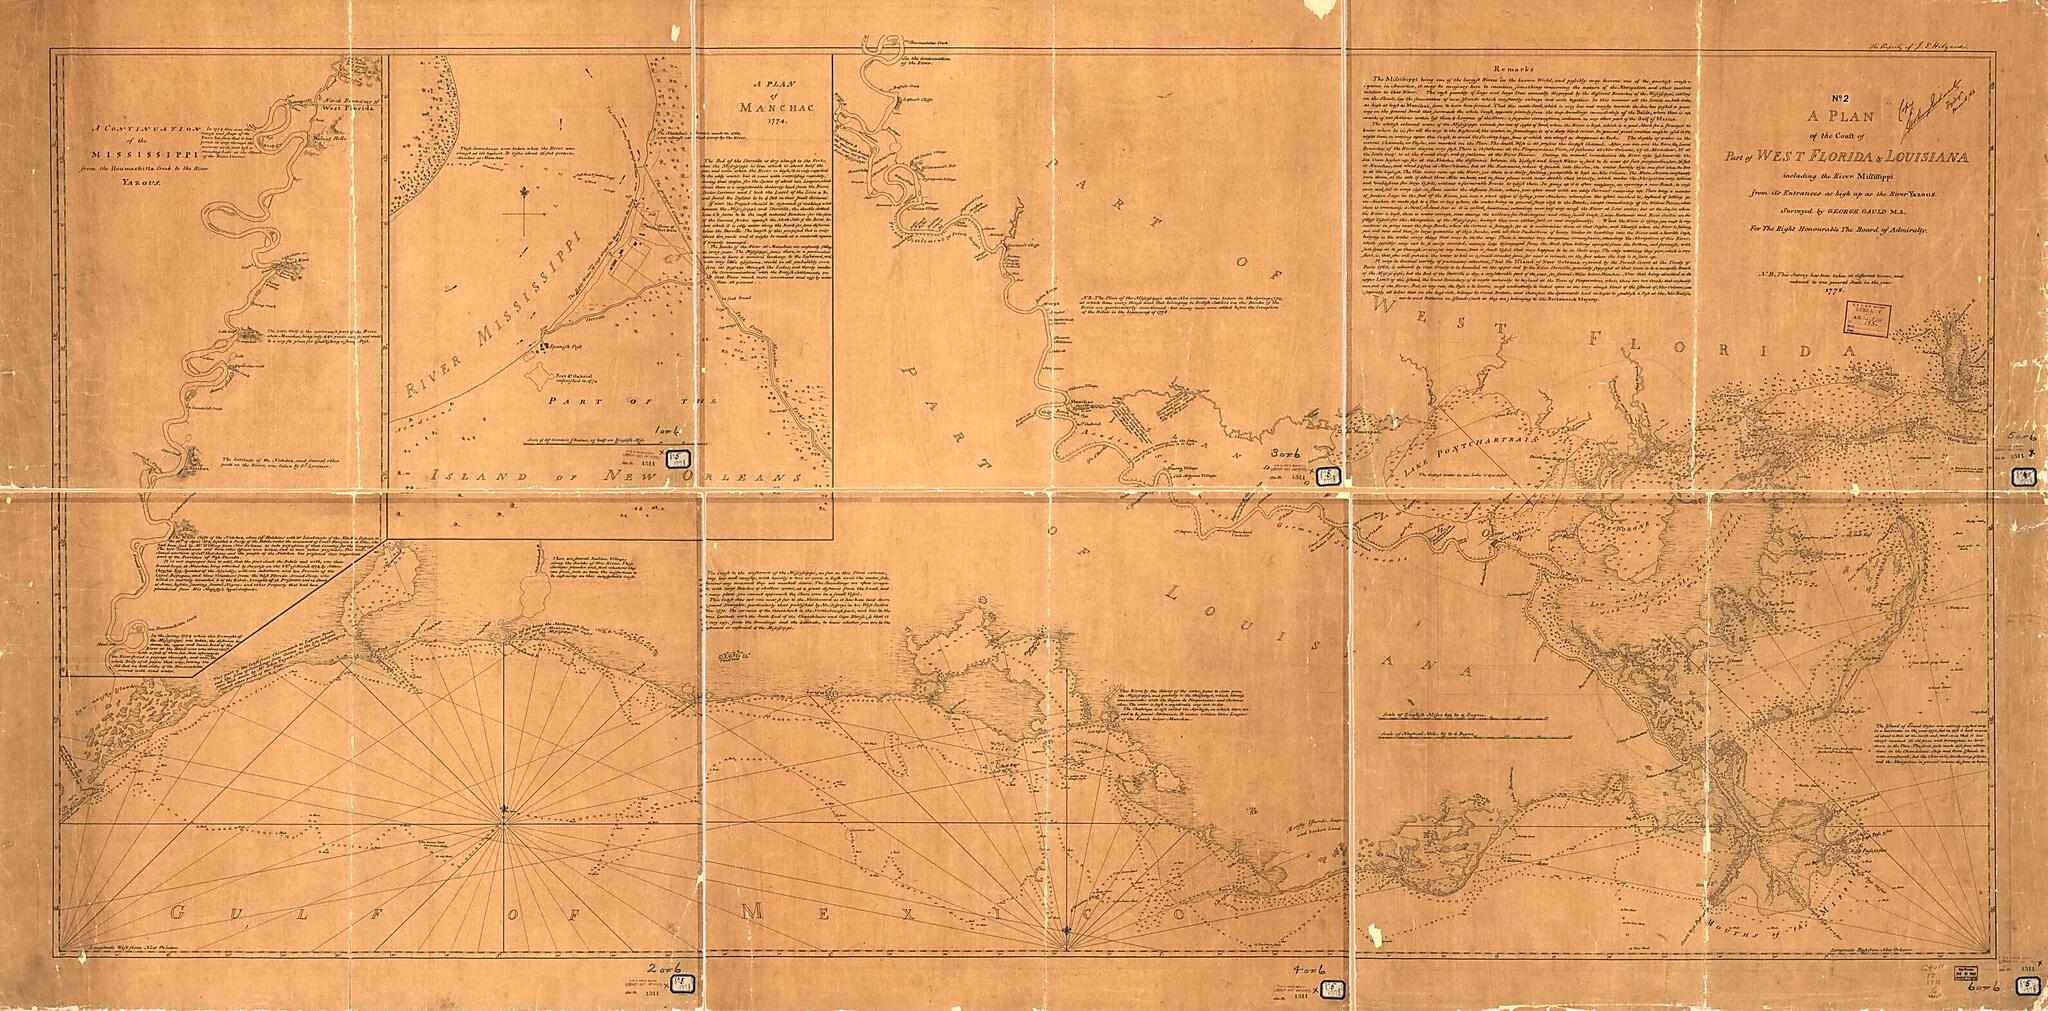 This old map of A Plan of the Coast of Part of West Florida &amp; Louisiana : Including the River Yazous from 1778 was created by George Gauld, J. E. (Julius Erasmus) Hilgard in 1778